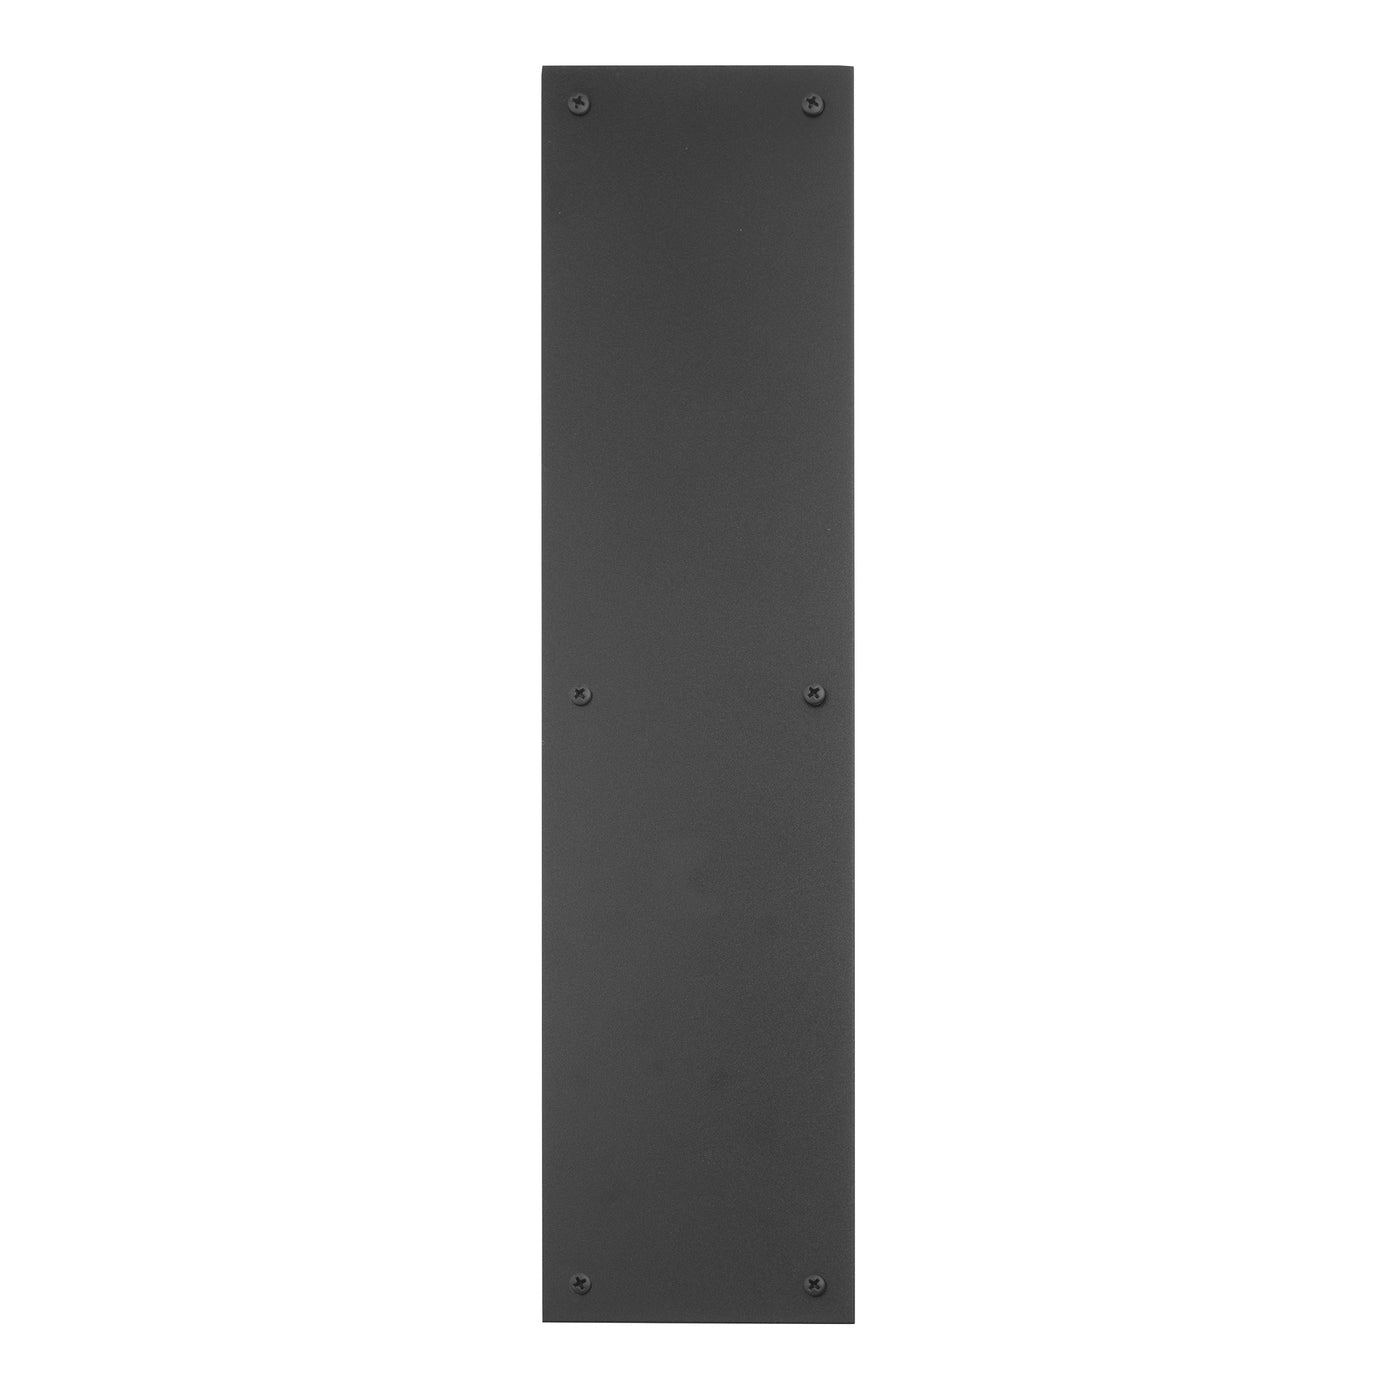 16 Inch Classic Antimicrobial Door Push Plate (Several Finish Options)